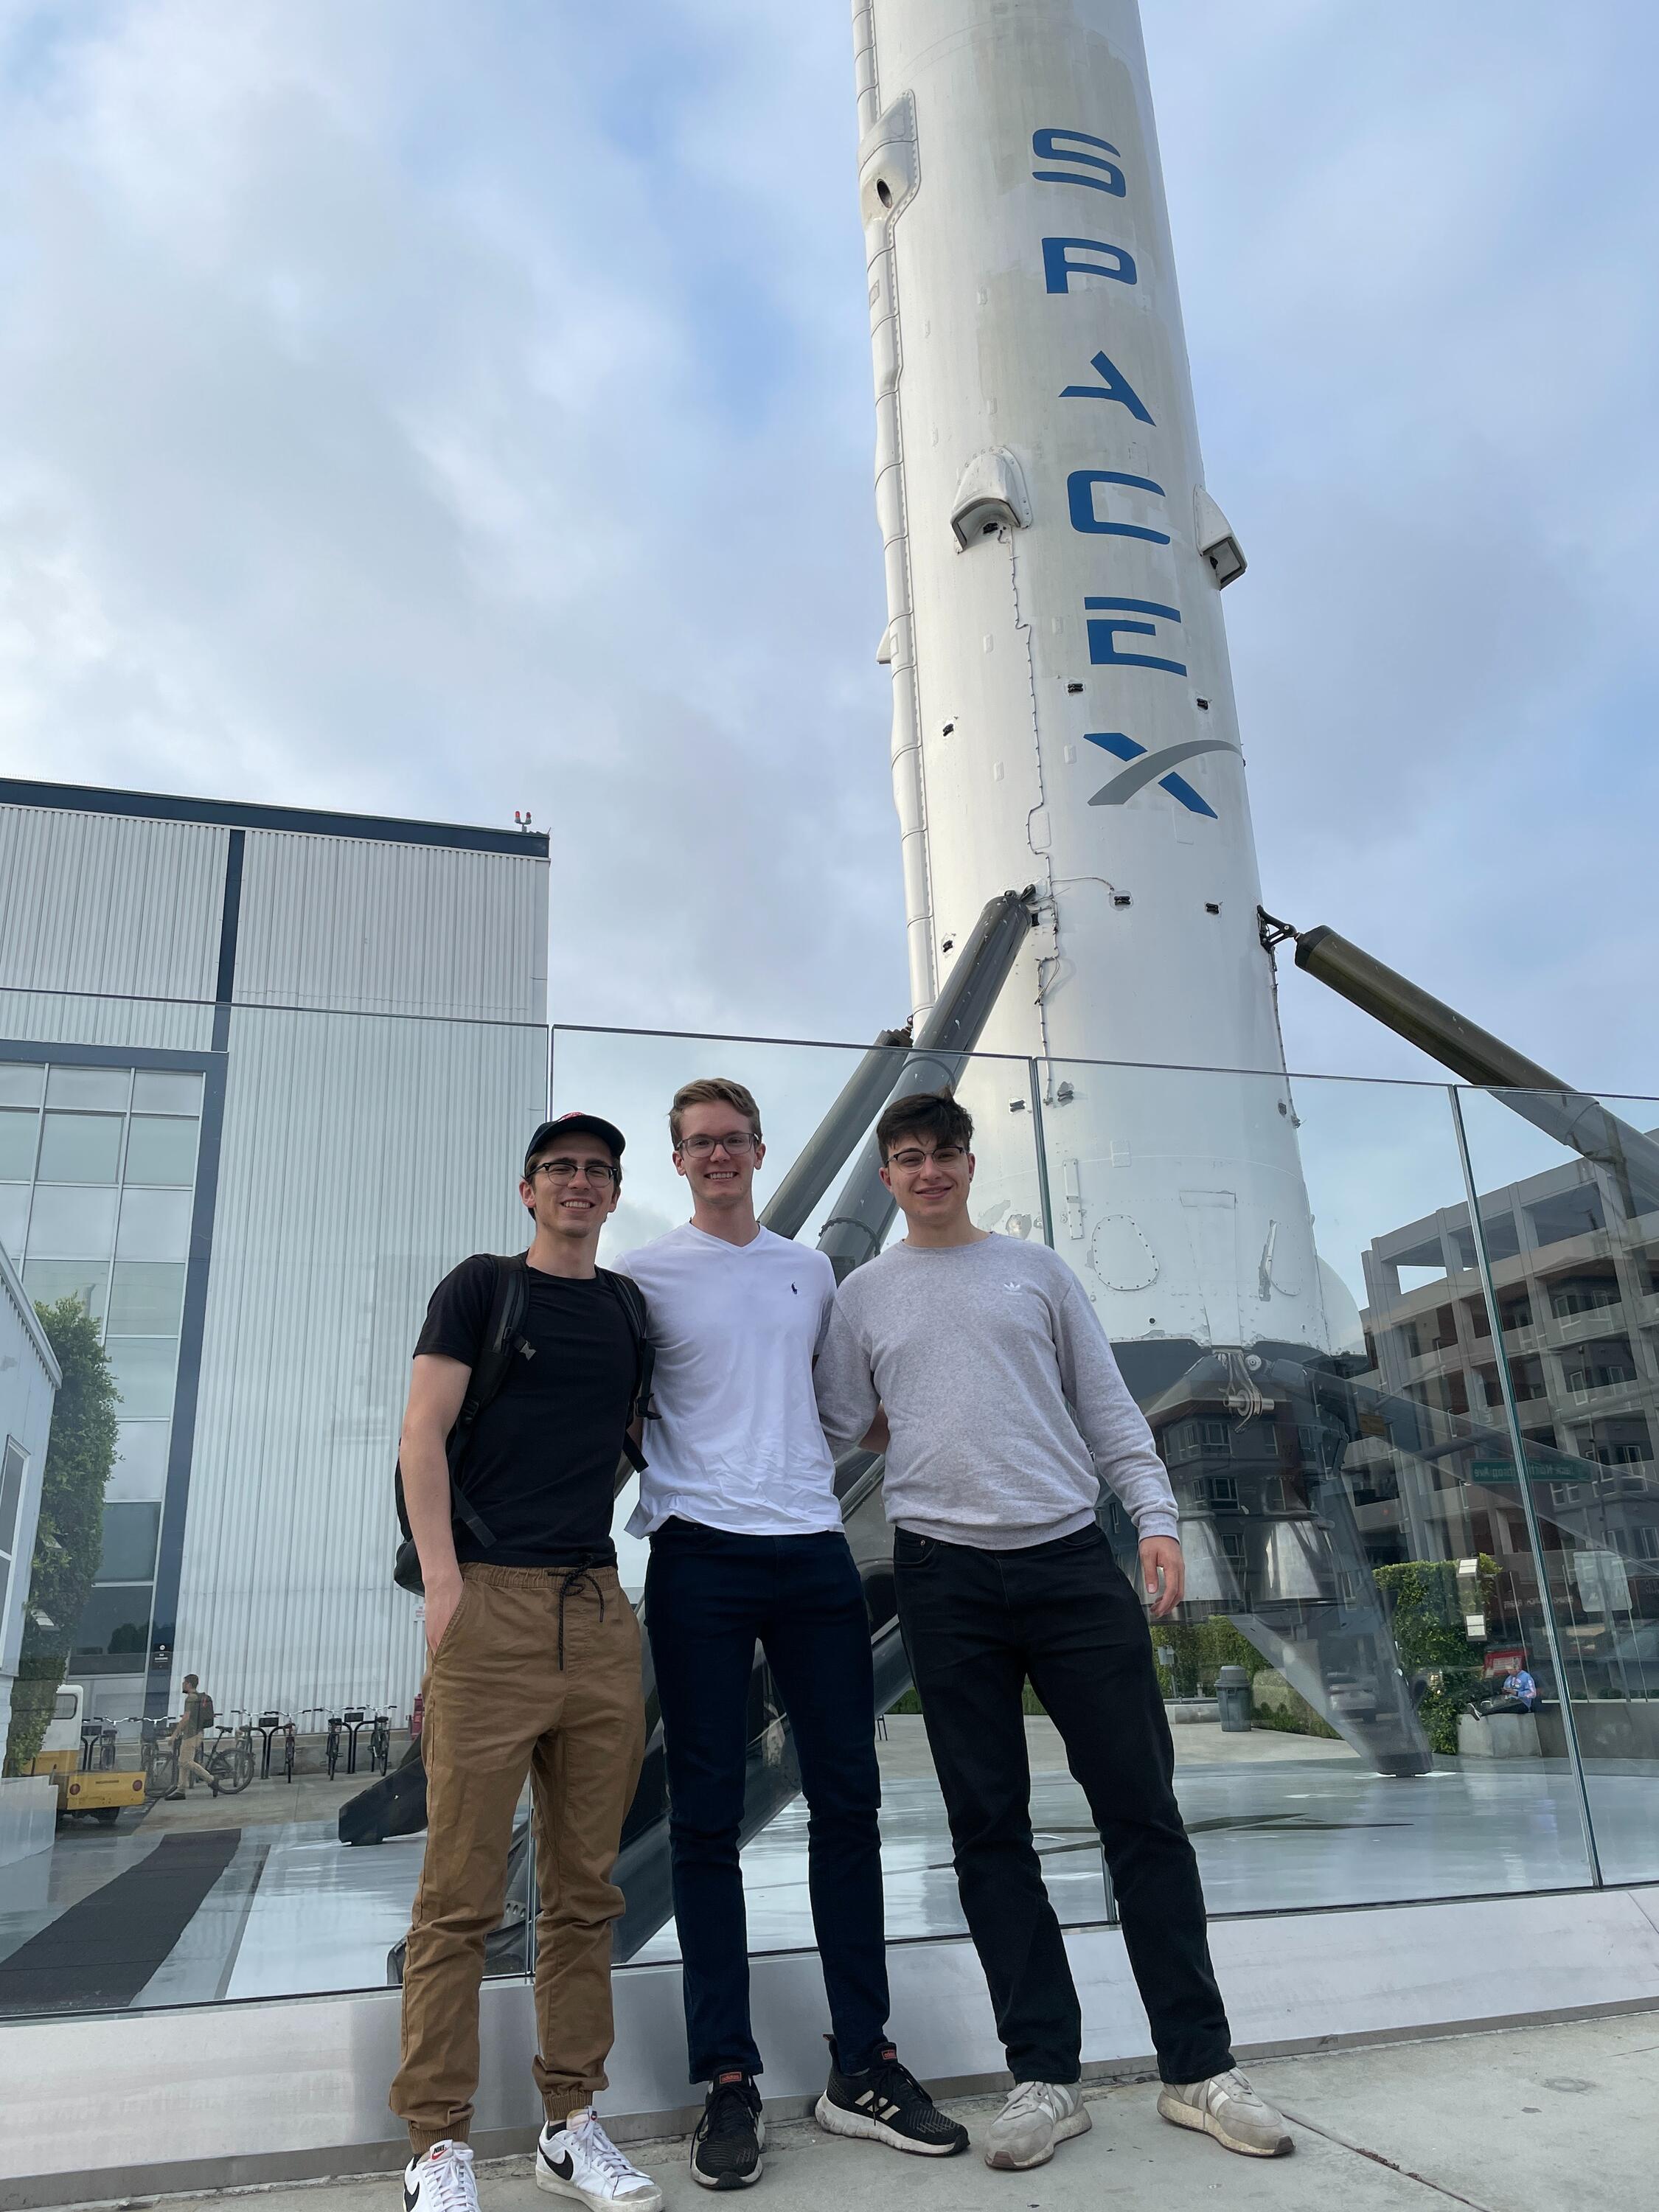 Sam and friends visiting the SpaceX.